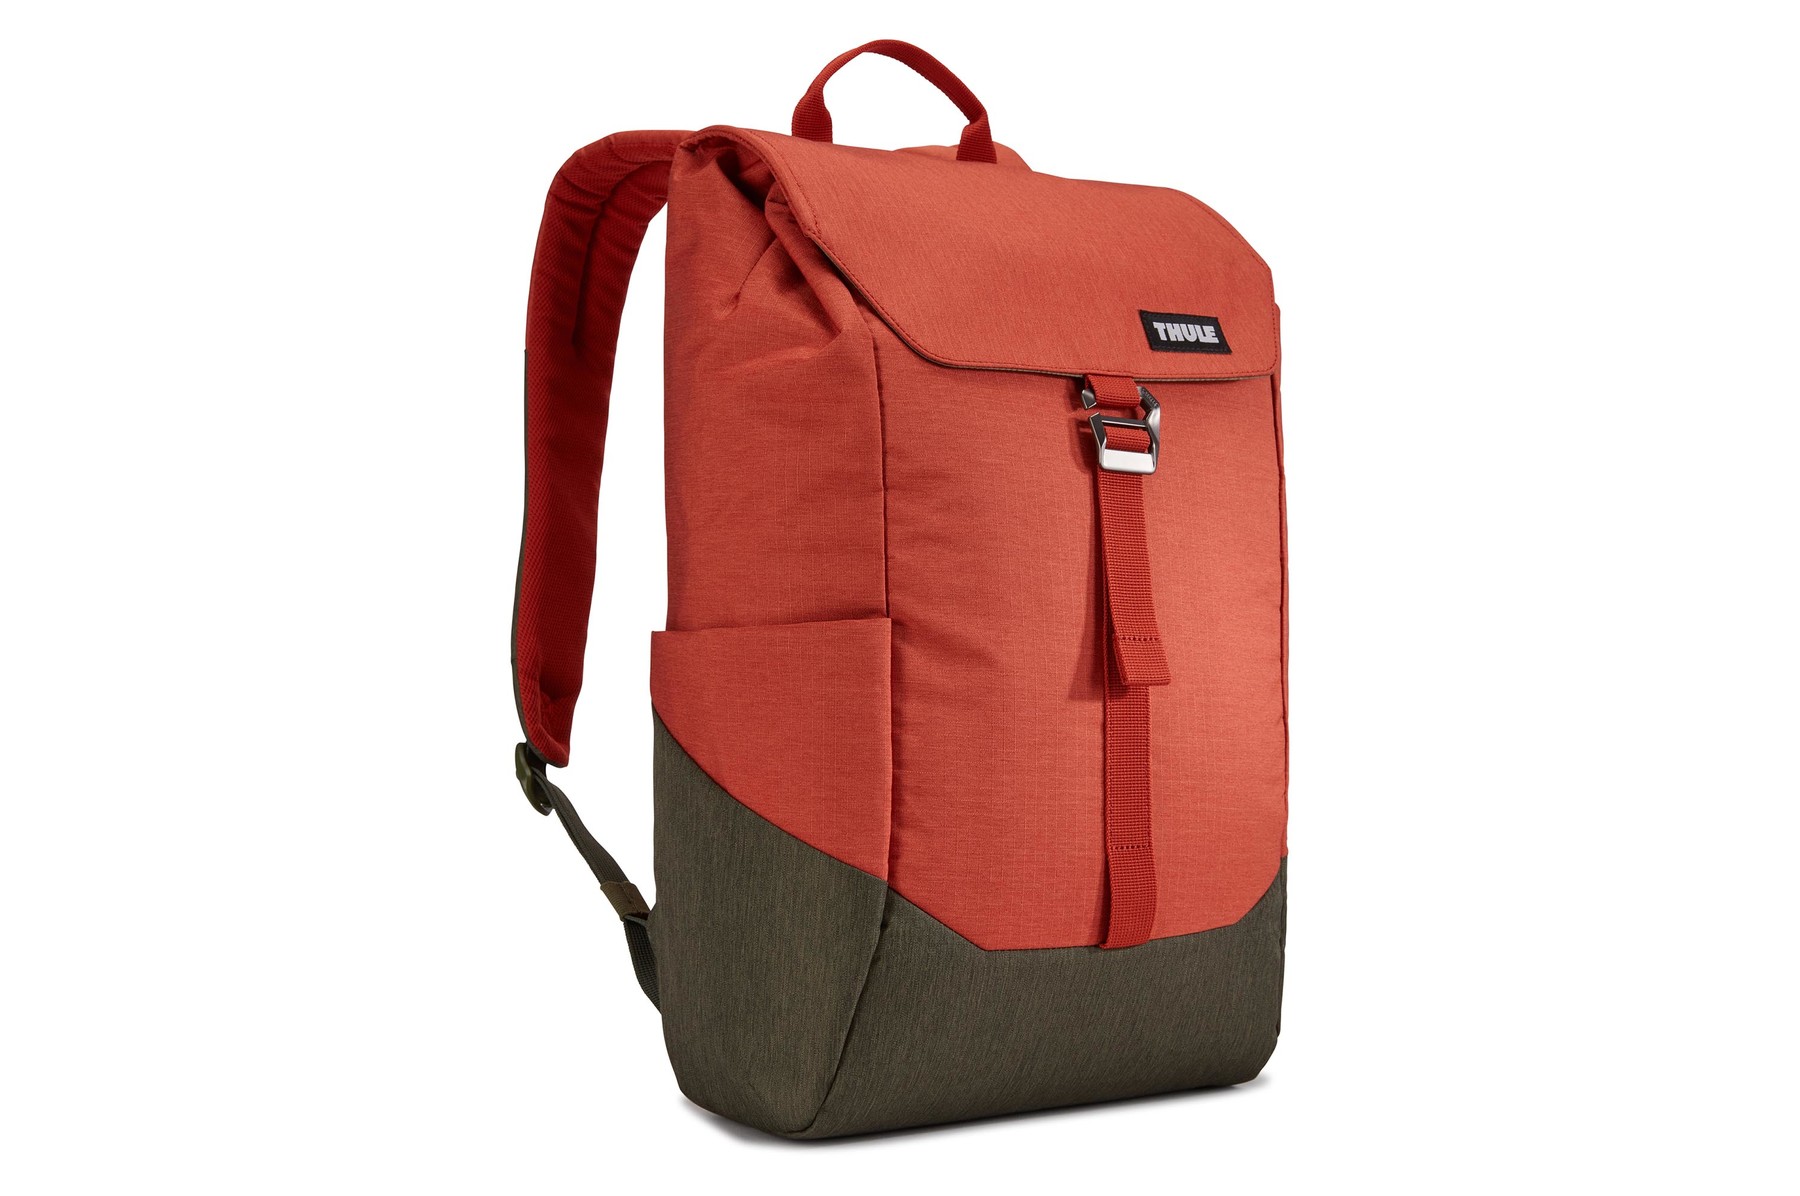 Рюкзак Thule Lithos Backpack 16 л (Rooibos/Forest Night)